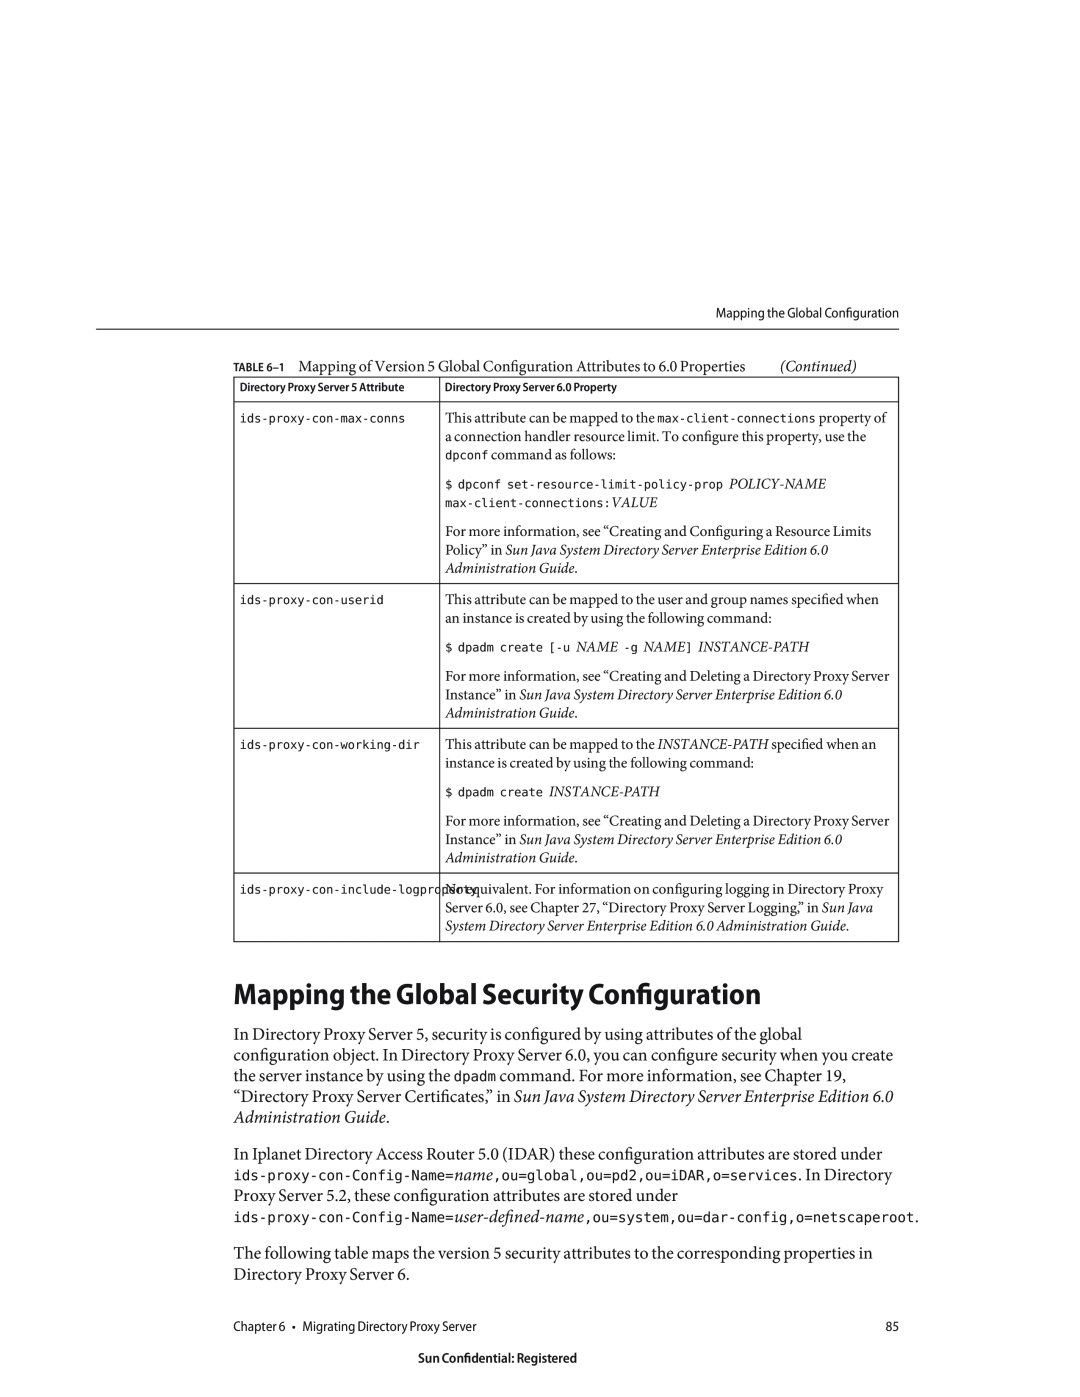 Sun Microsystems 8190994 manual Mapping the Global Security Configuration 